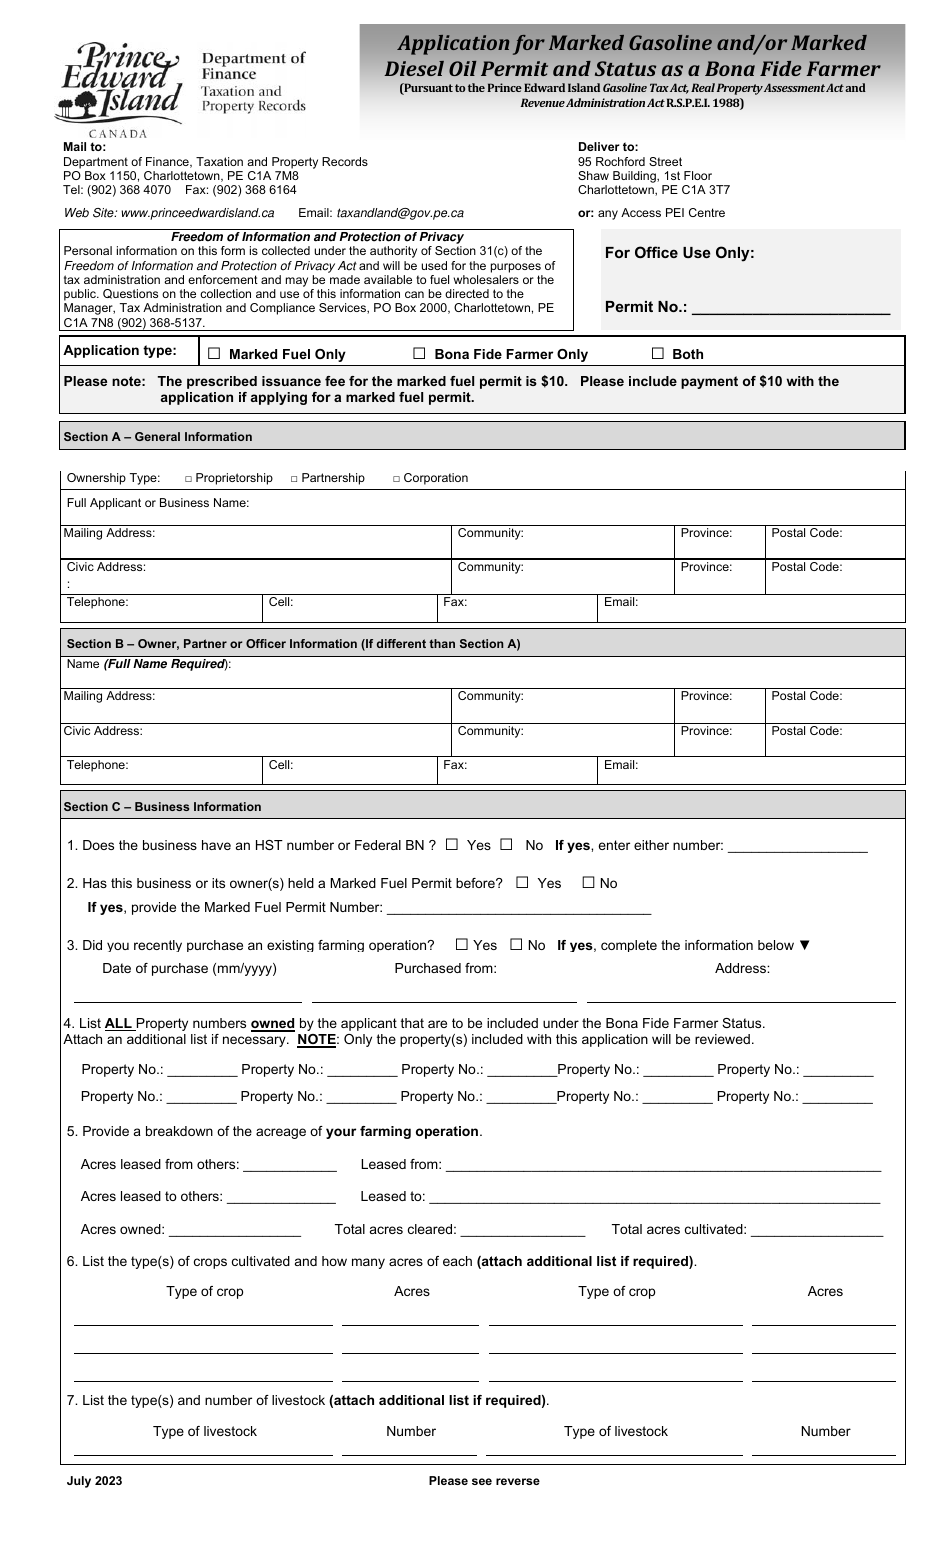 Application for Marked Gasoline and / or Marked Diesel Oil Permit and Levy Exemption Permit and Status as a Bona Fide Farmer - Prince Edward Island, Canada, Page 1